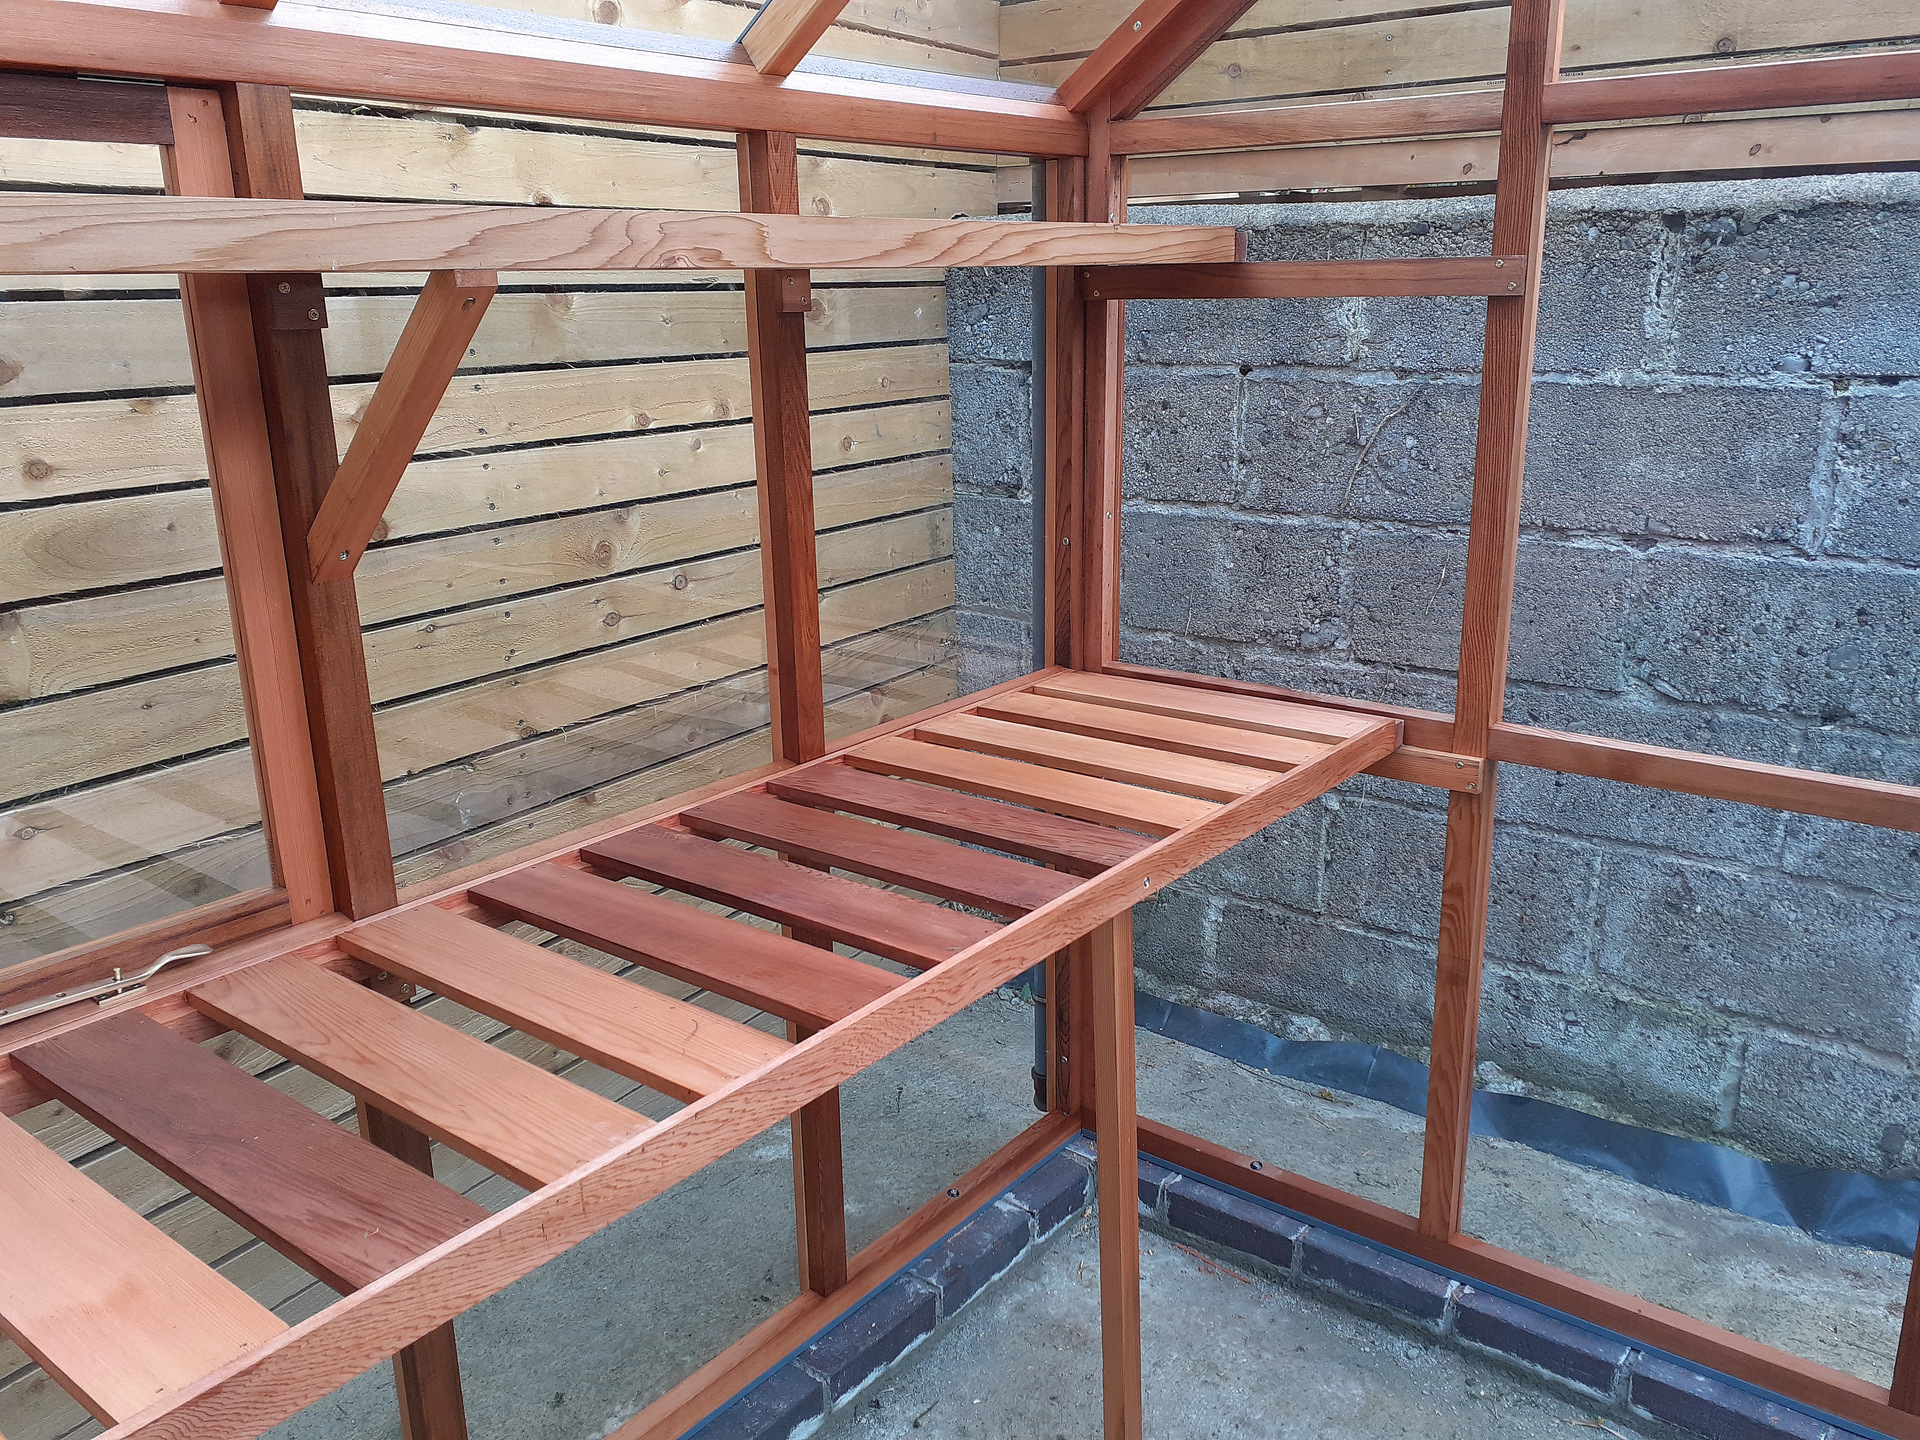 Cedar Staging & Shelving, essential optional accessories for the superbly crafted Classic Six Cedar Timber Greenhouse | Supplied + Fitted in Sandymount, Dublin 4 by Owen Chubb Garden Landscapers, Tel 087-2306 128